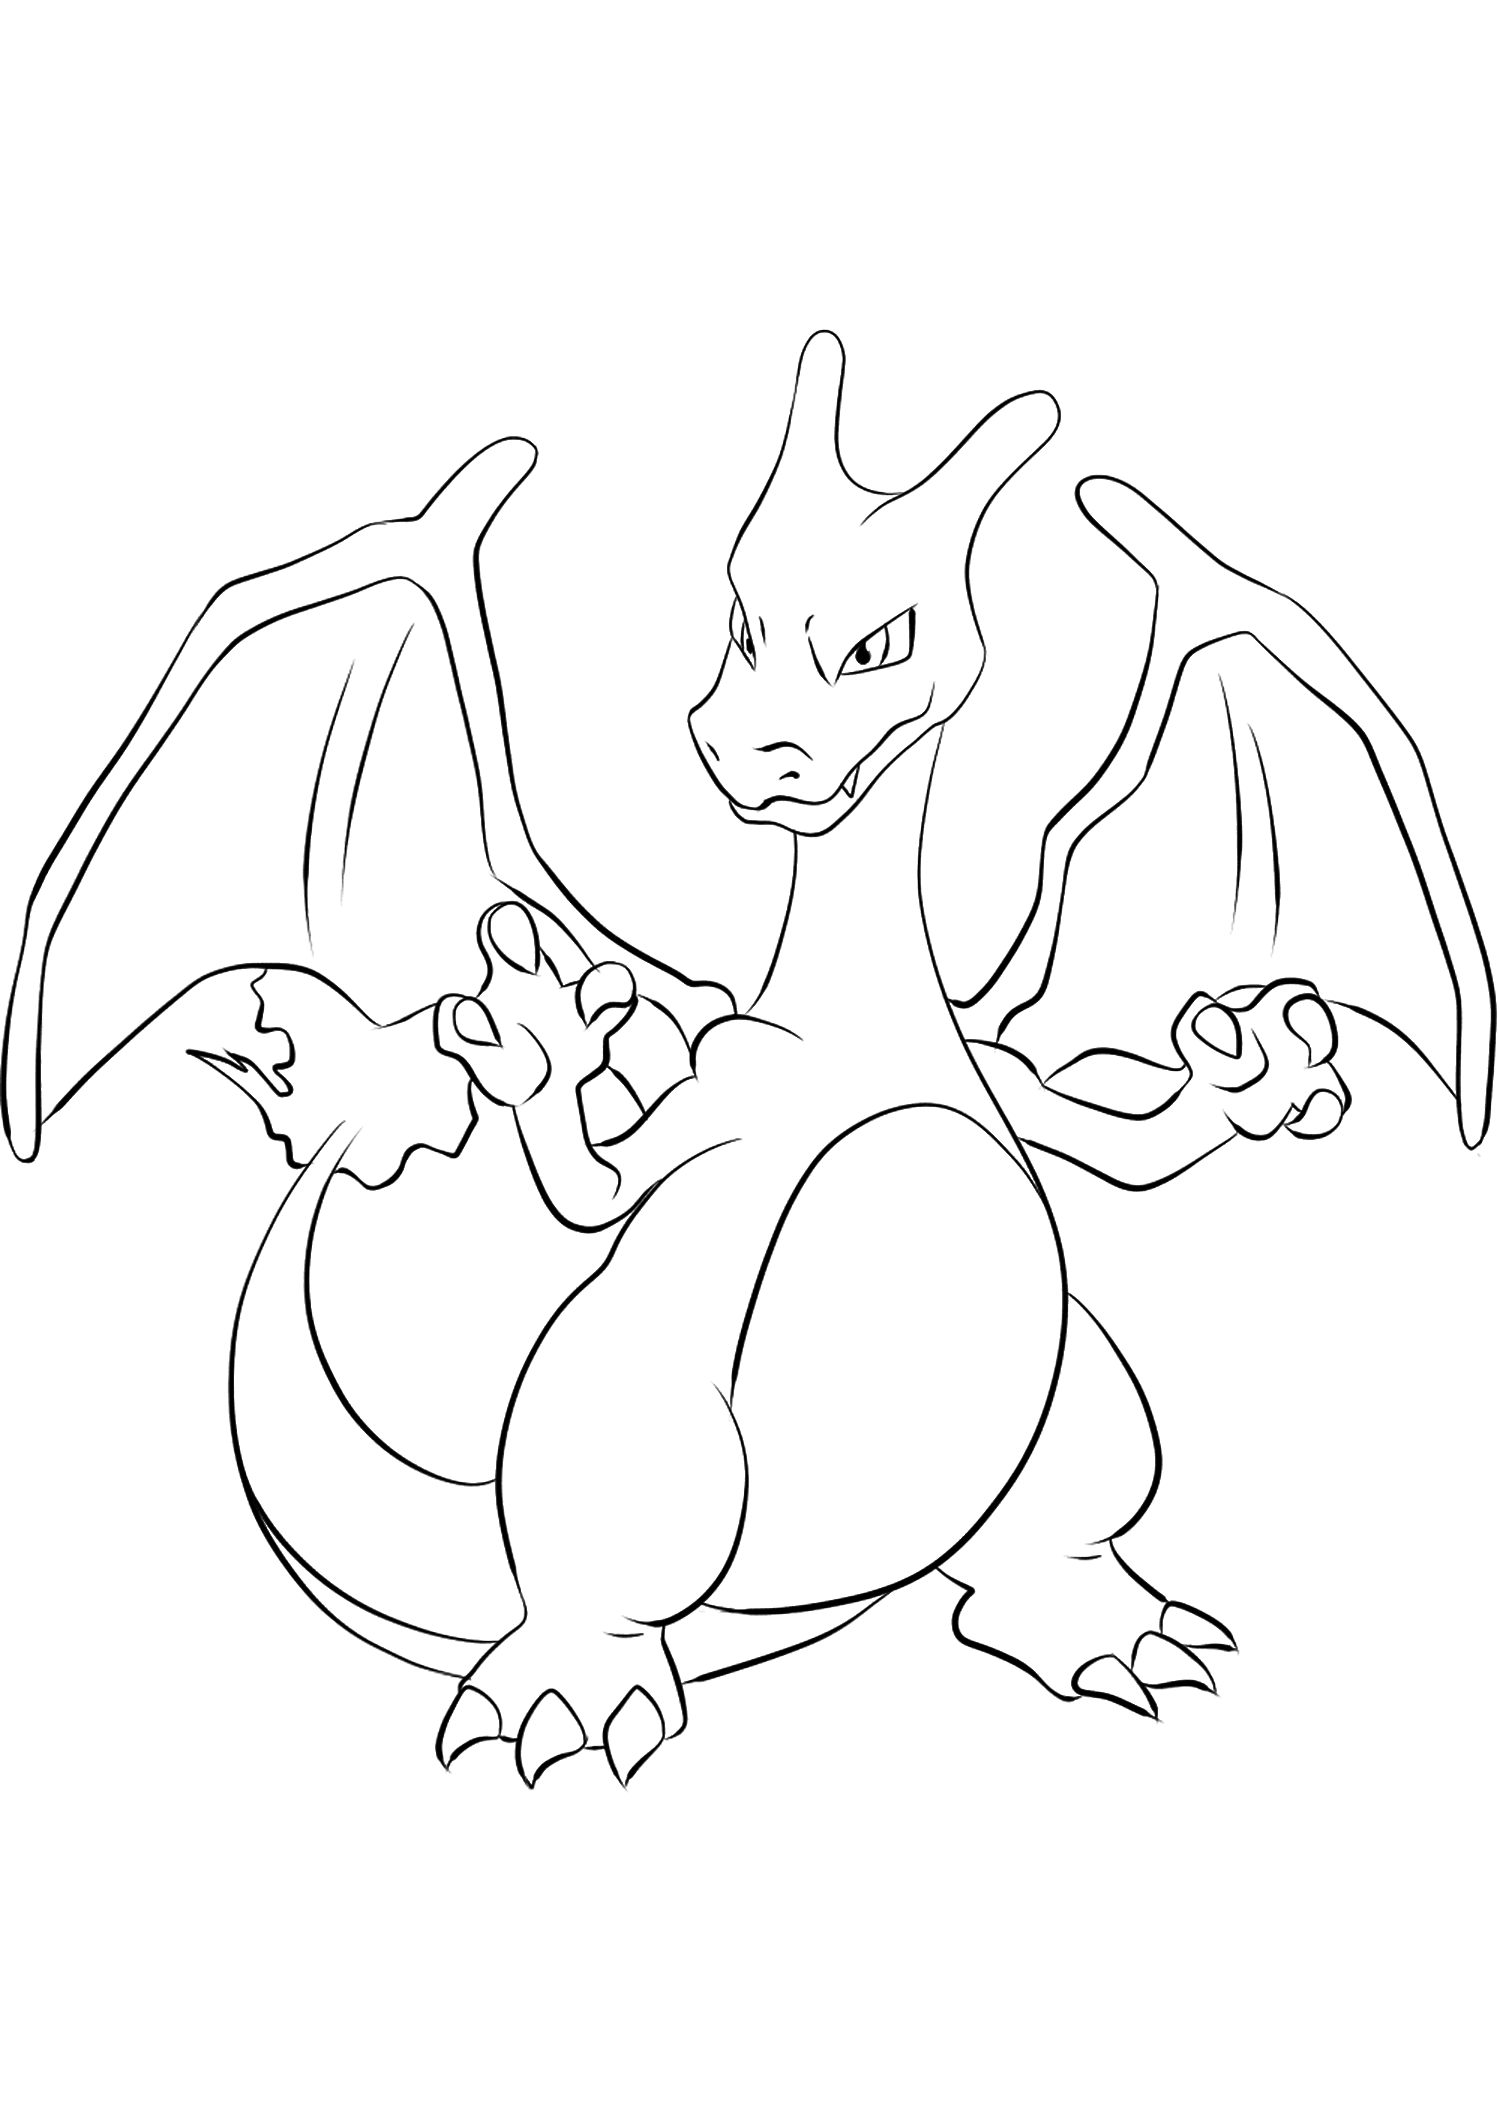 Charizard (No.06). Charizard Coloring page, Generation I Pokemon of type Fire and FlyingOriginal image credit: Pokemon linearts by Lilly Gerbil'font-size:smaller;color:gray'>Permission: All rights reserved © Pokemon company and Ken Sugimori.